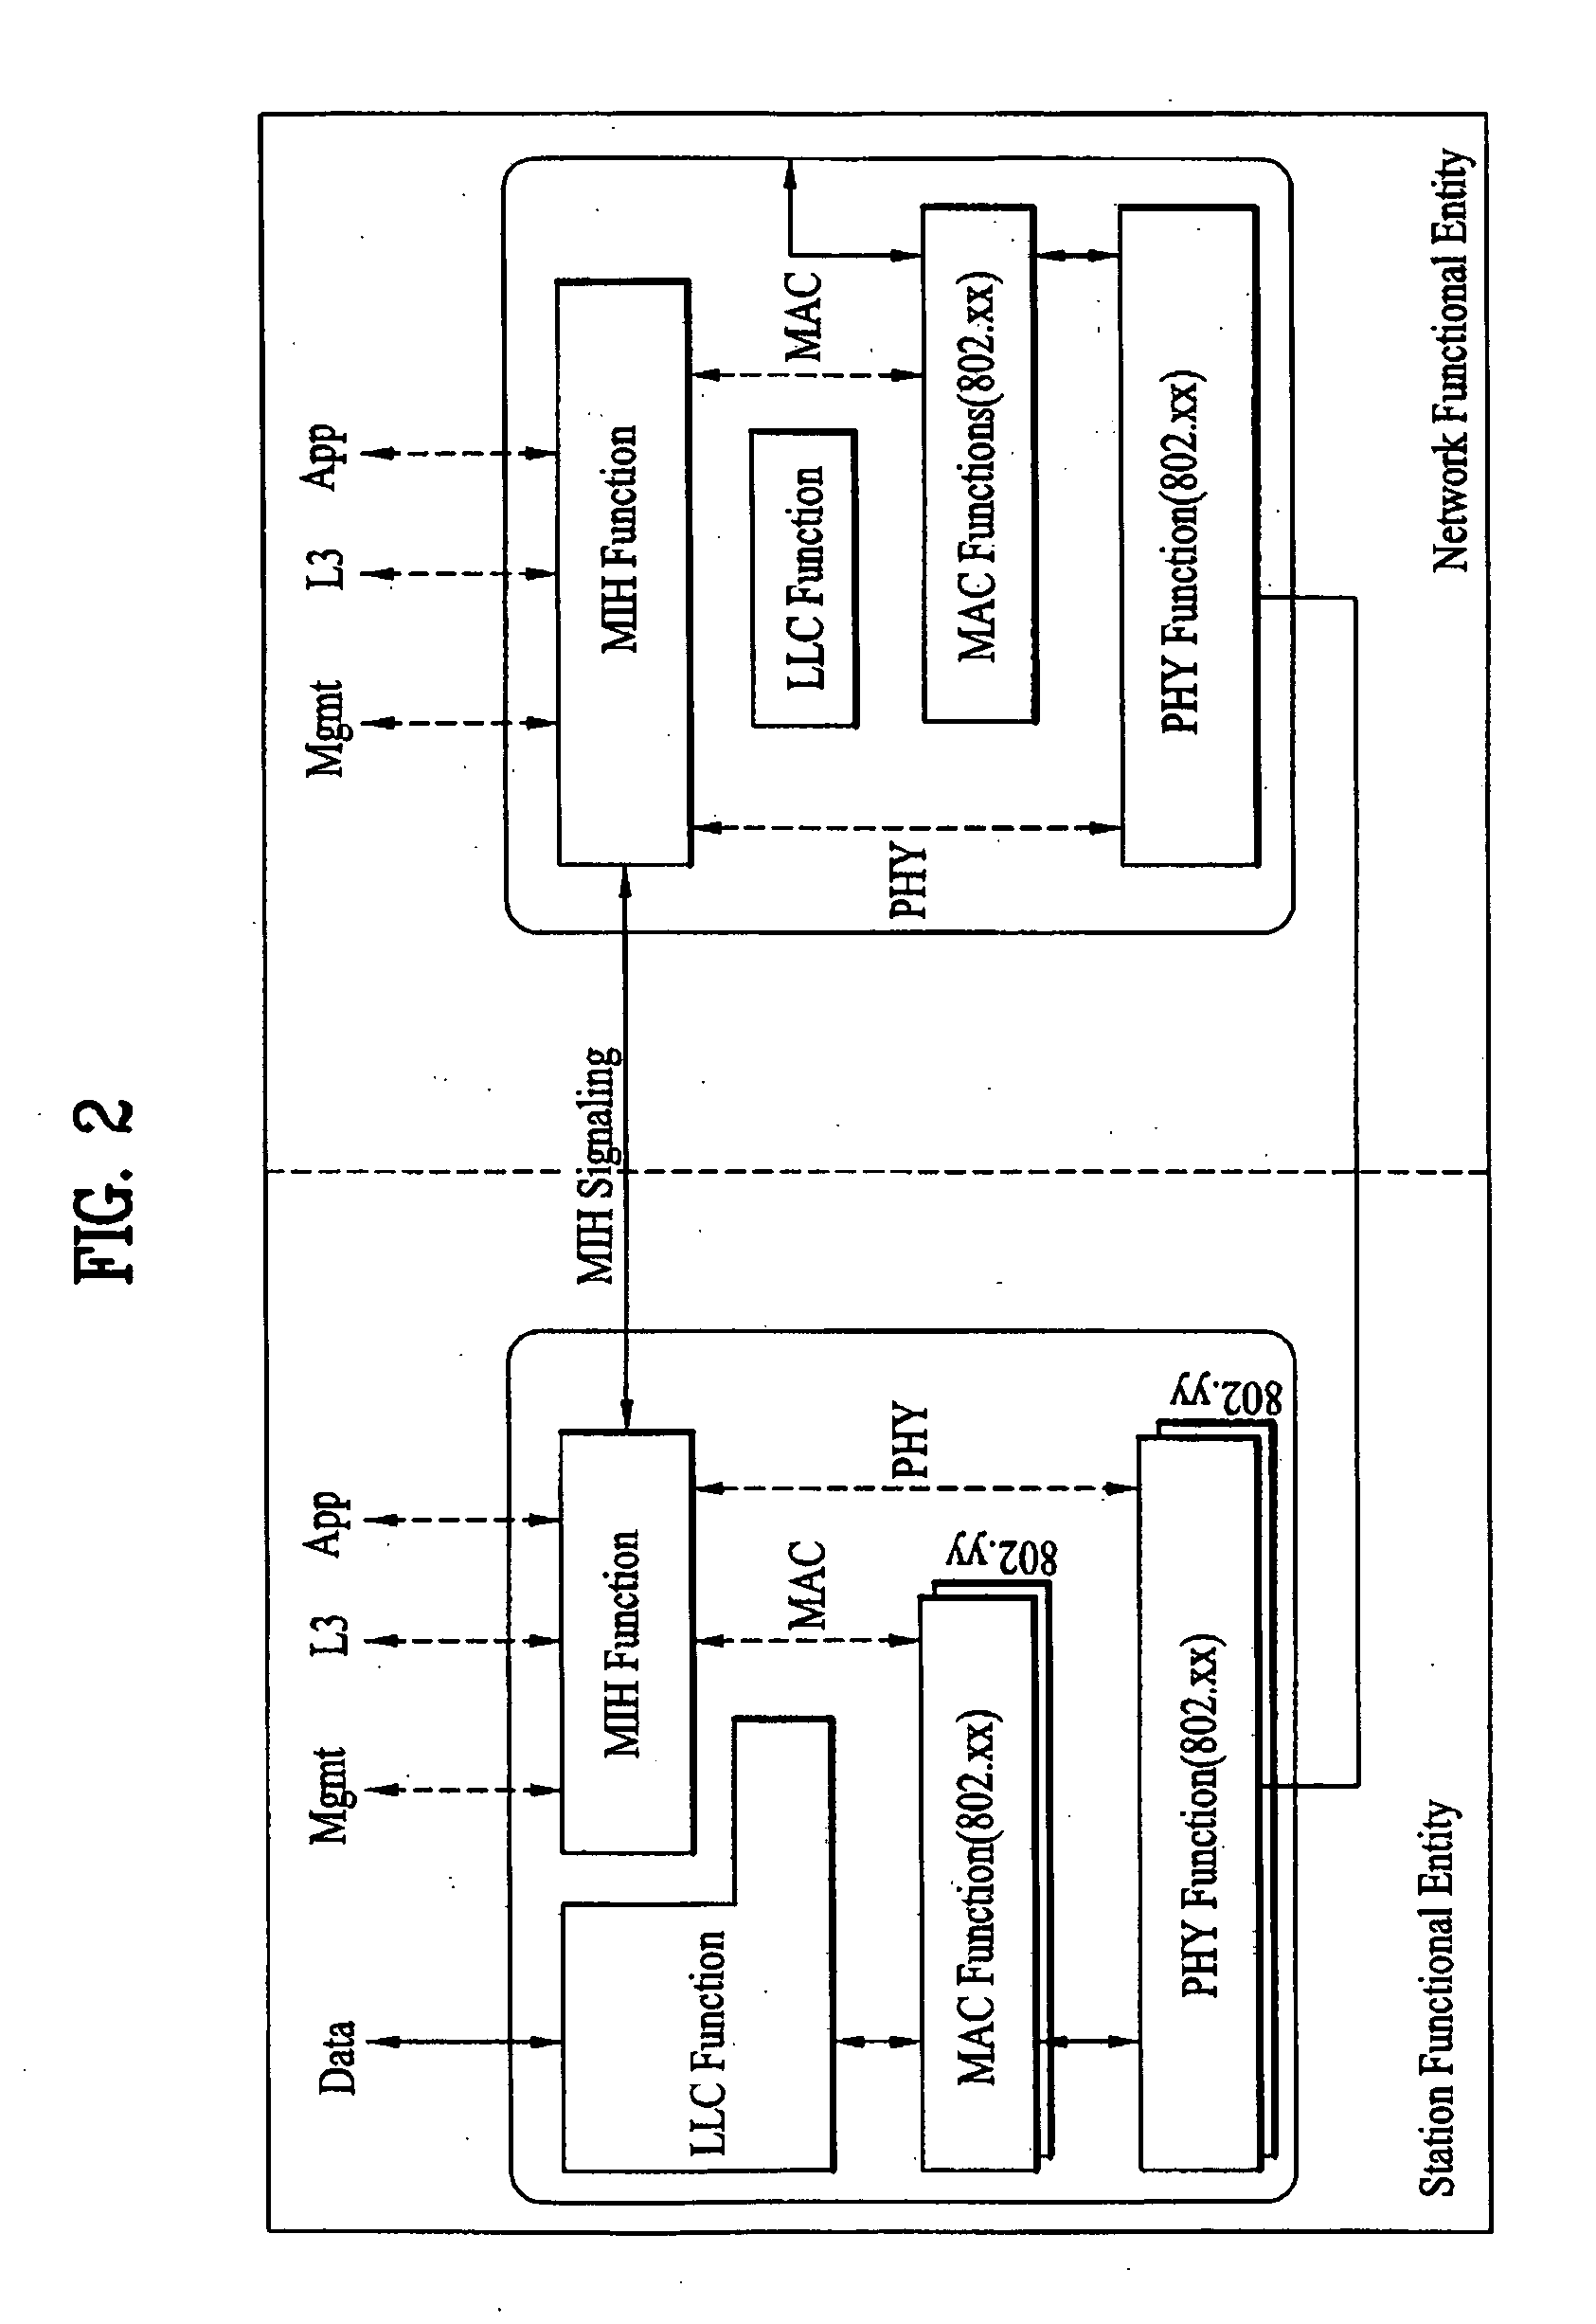 Reporting link layer status information using heterogeneous network handover module in mobile communication system